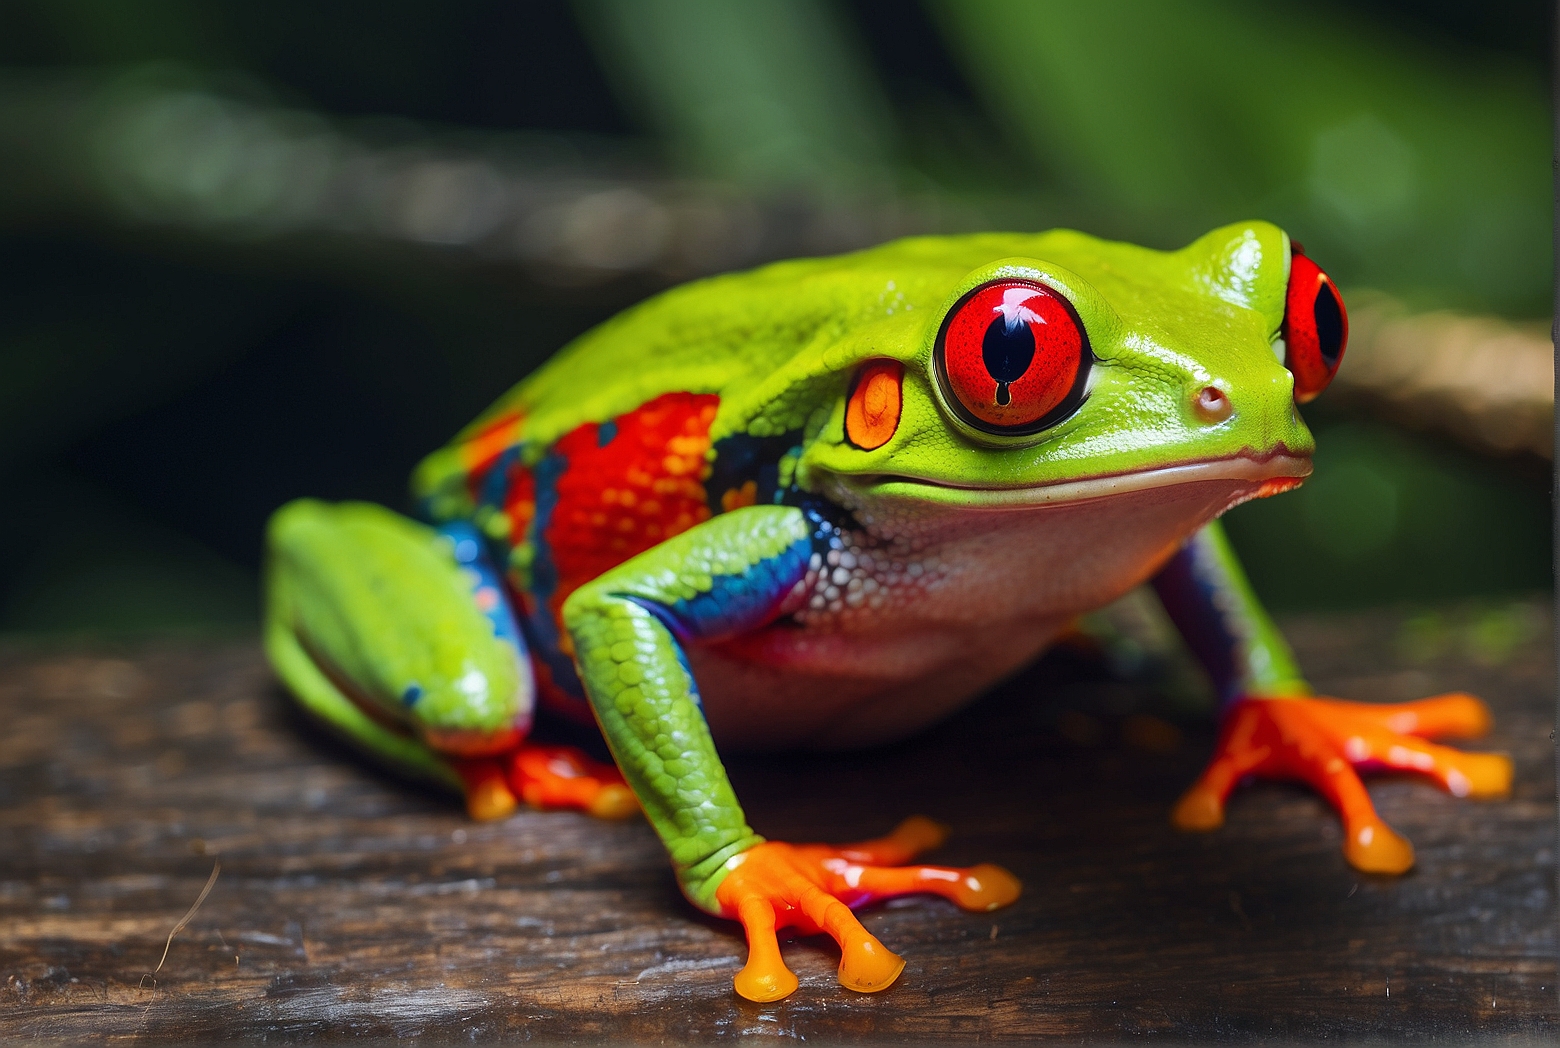 Is the Red Eyed Tree Frog Poisonous?